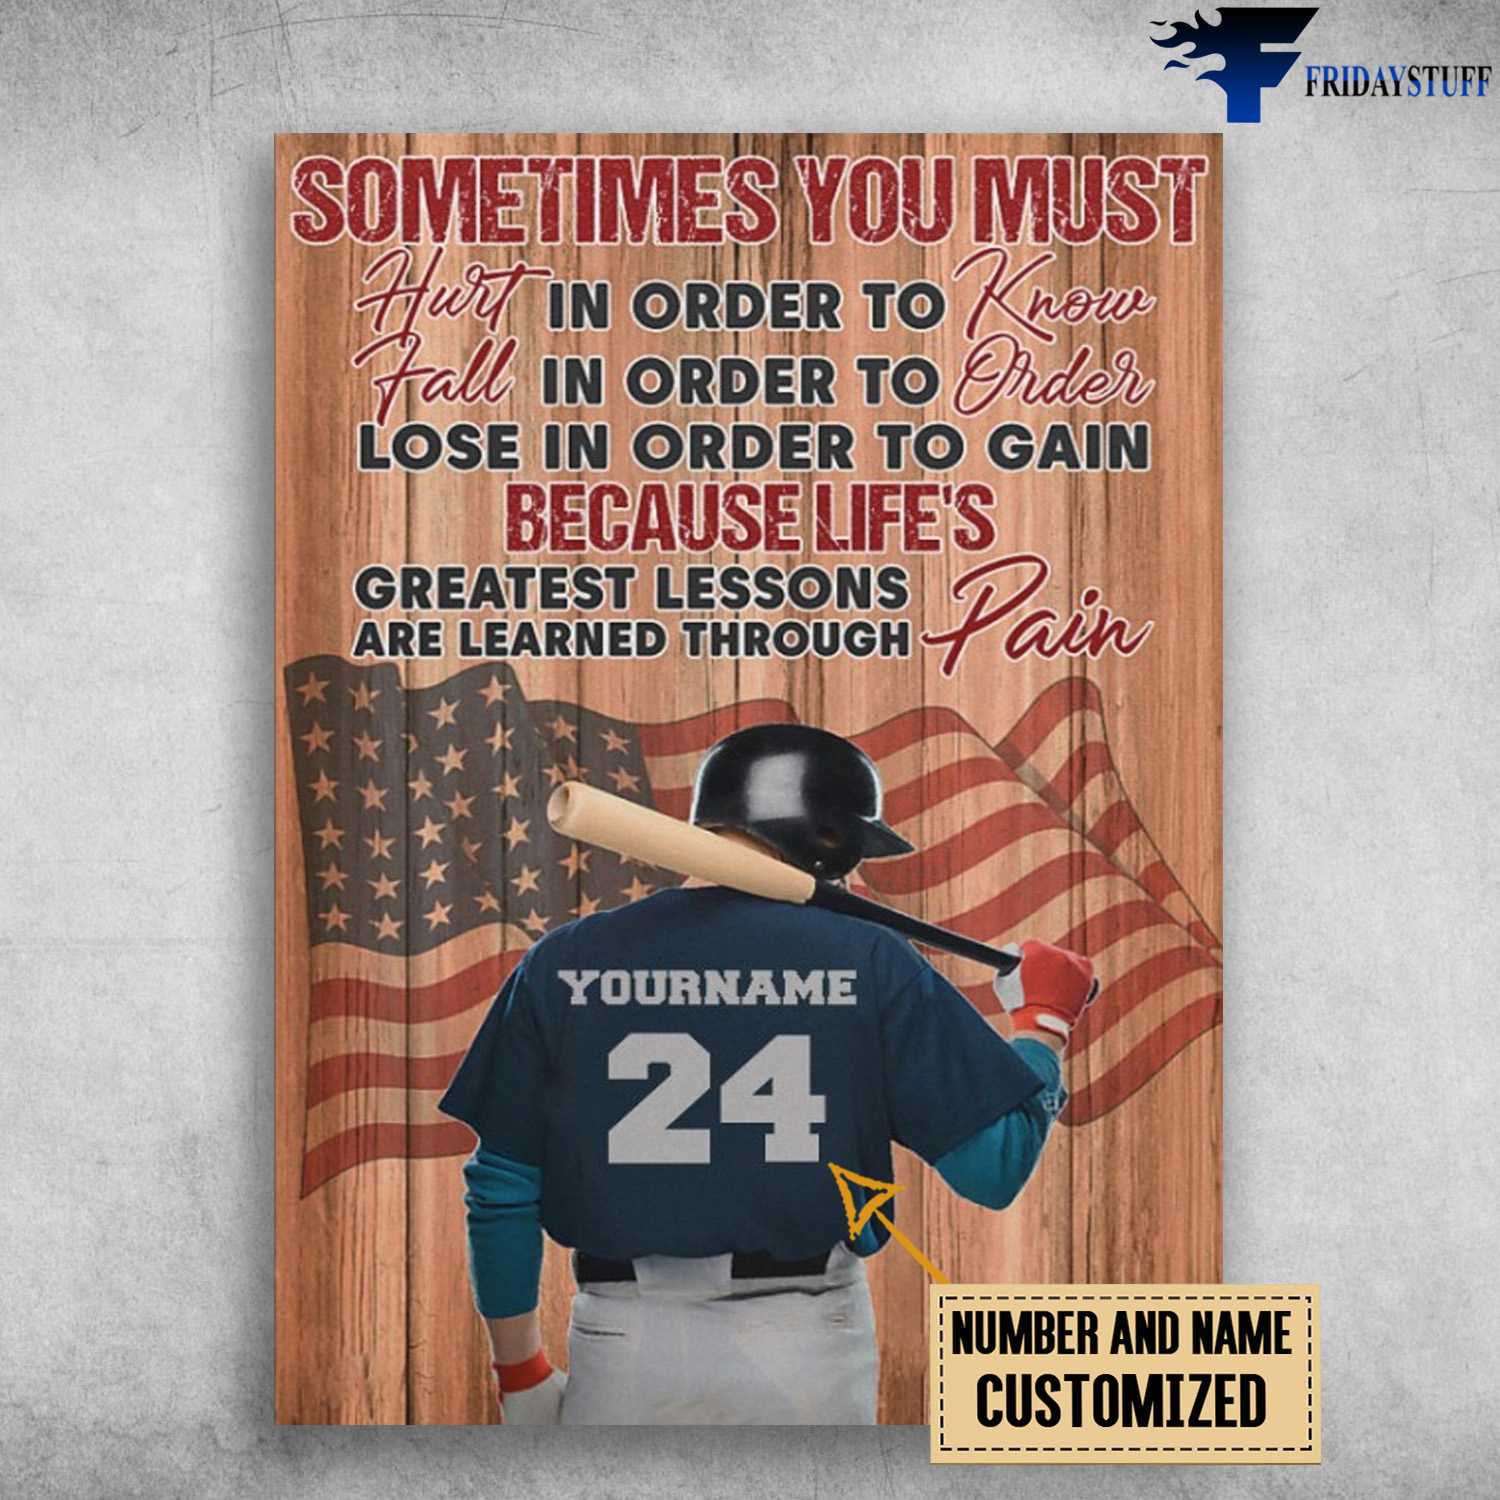 American Baseball, Baseball Lover, Sometimes You Must Hurt In Order To Know, Fall In Order To Order, Lose In Order To Gain, Because Life's Greatest Lessons, Are Learned Through Pain